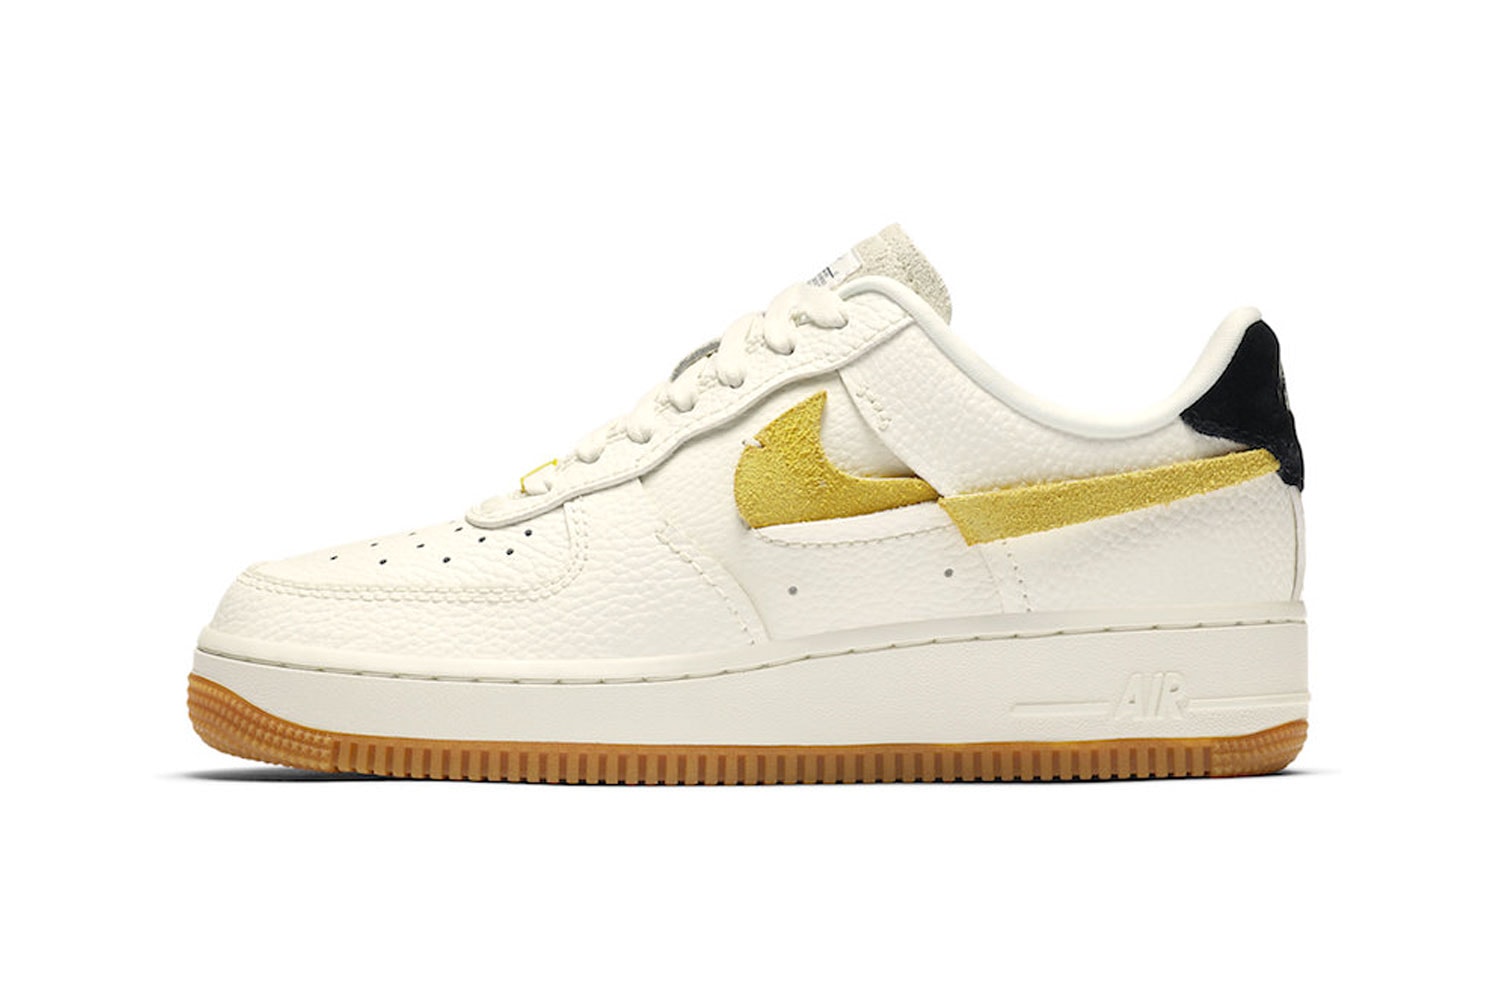 Nike Air Force 1 Vandalized Sail Release Date